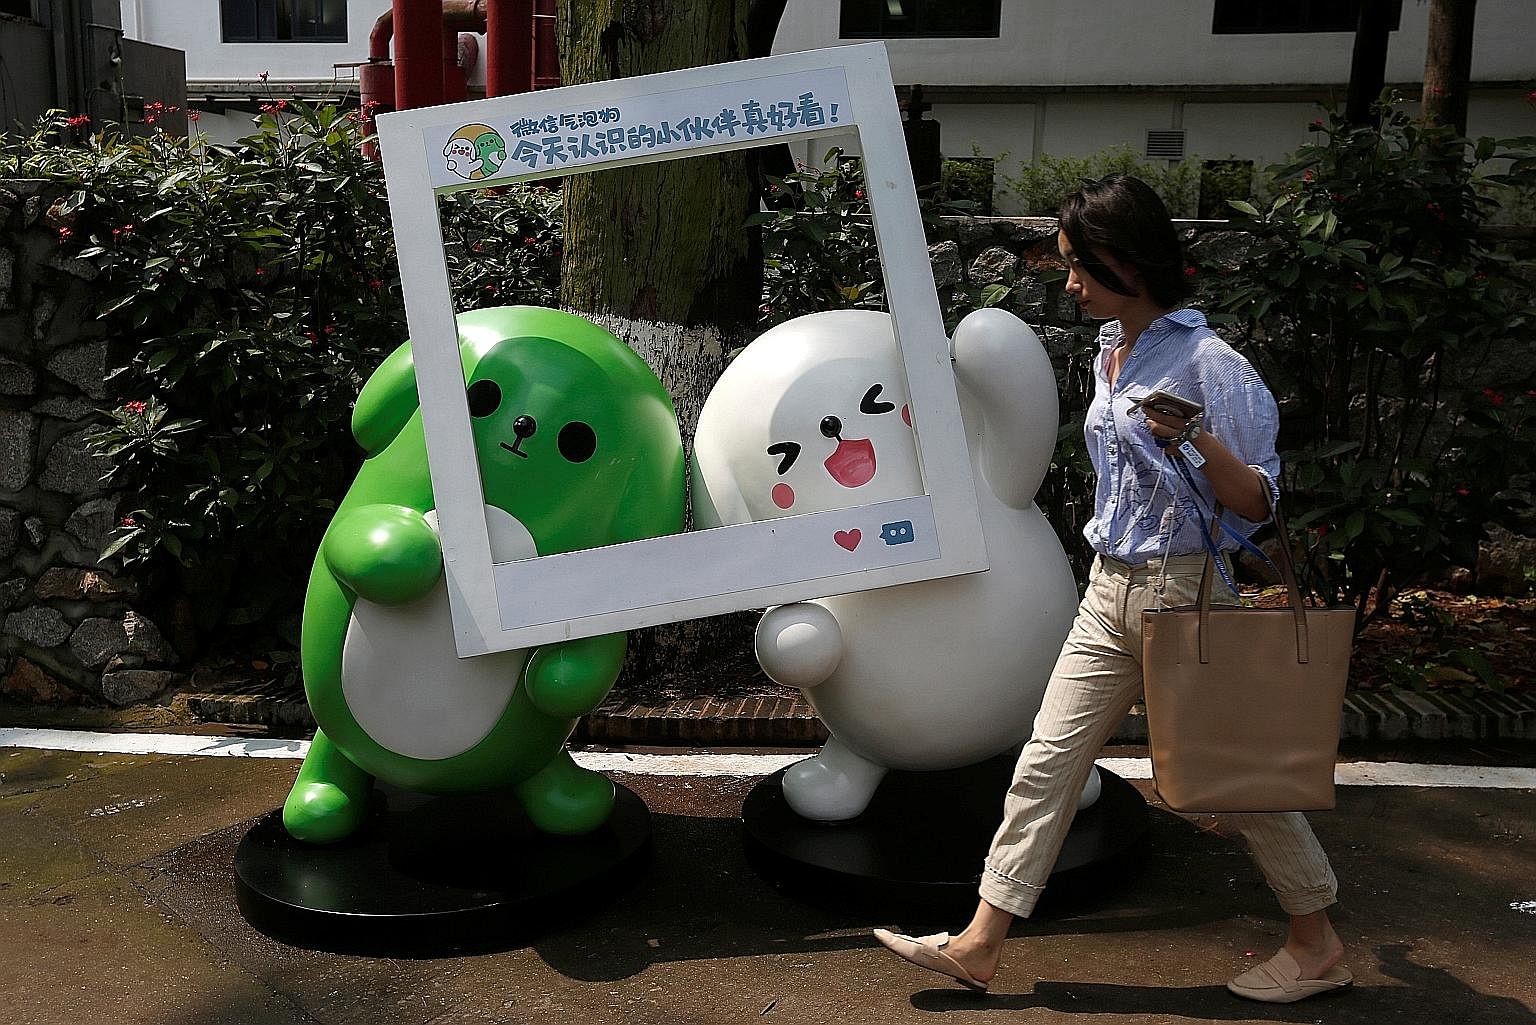 Mascots of Tencent's mobile chat service WeChat inside Guangzhou's TIT Creativity Industry Zone. With a market value of over $460 billion, Tencent is now worth almost half as much as all the companies listed on the Singapore Exchange, even though it 